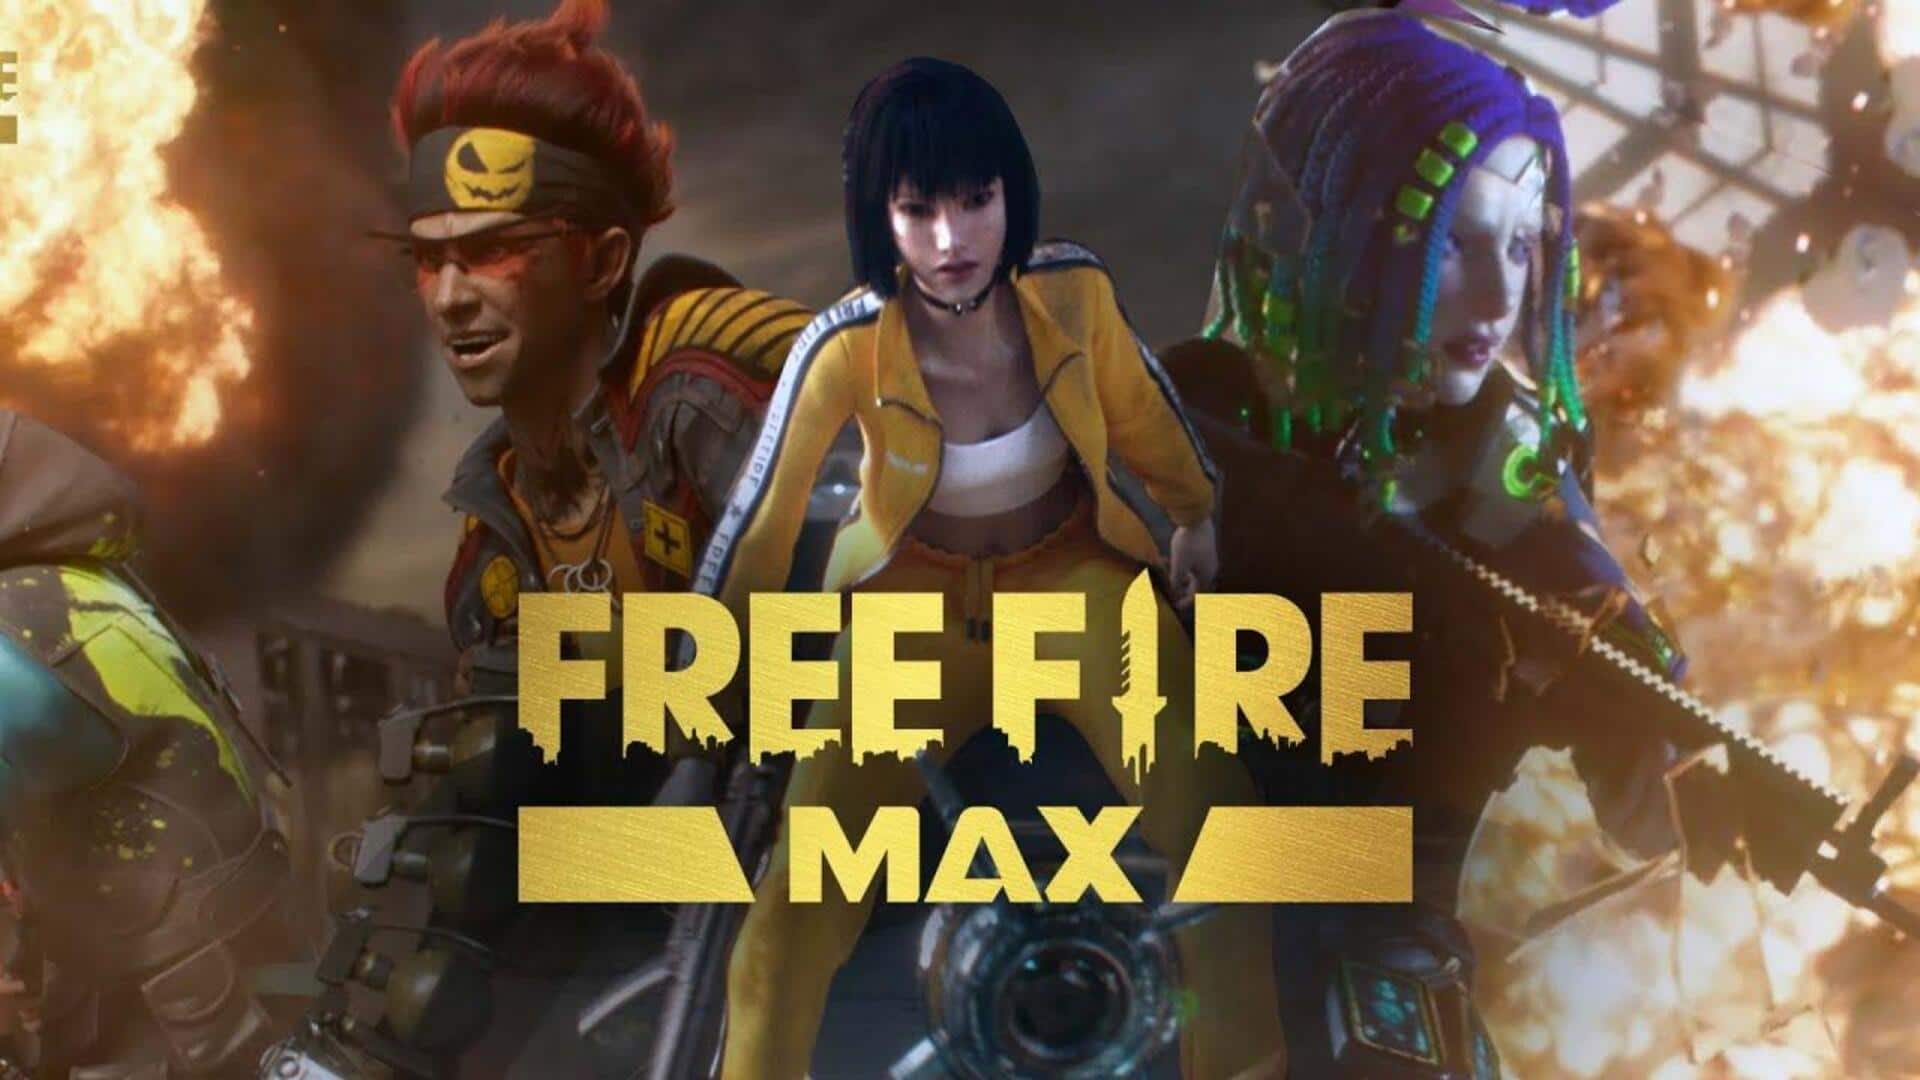 Free Fire MAX codes for March 1: How to redeem